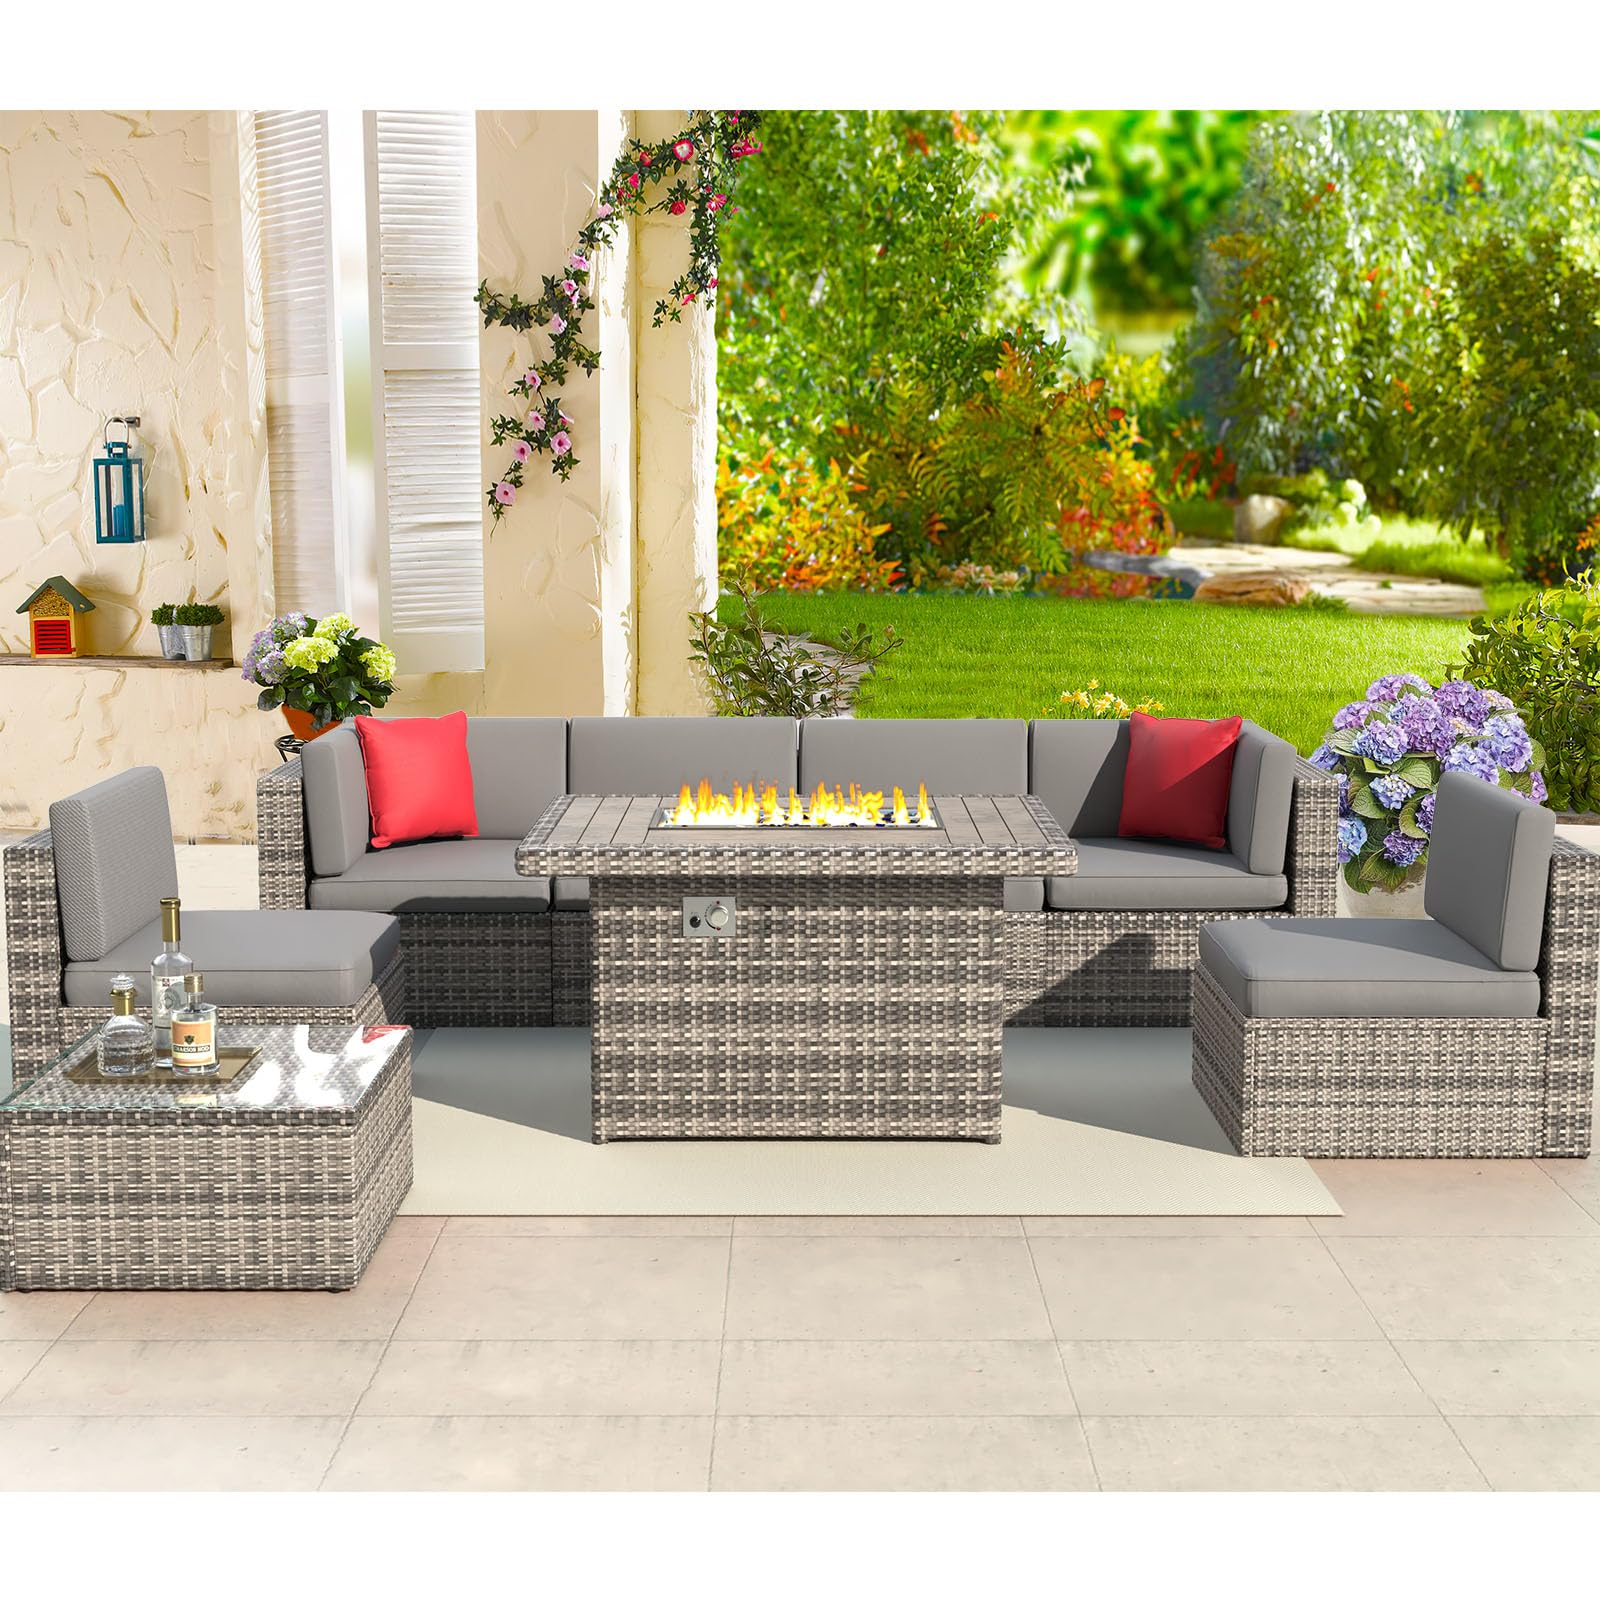 Aoxun 8PCS Patio Furniture Set with 40" Fire Pit Table Outdoor Sectional Sofa Set Wicker Furniture Set with Coffee Table (Grey Wicker)